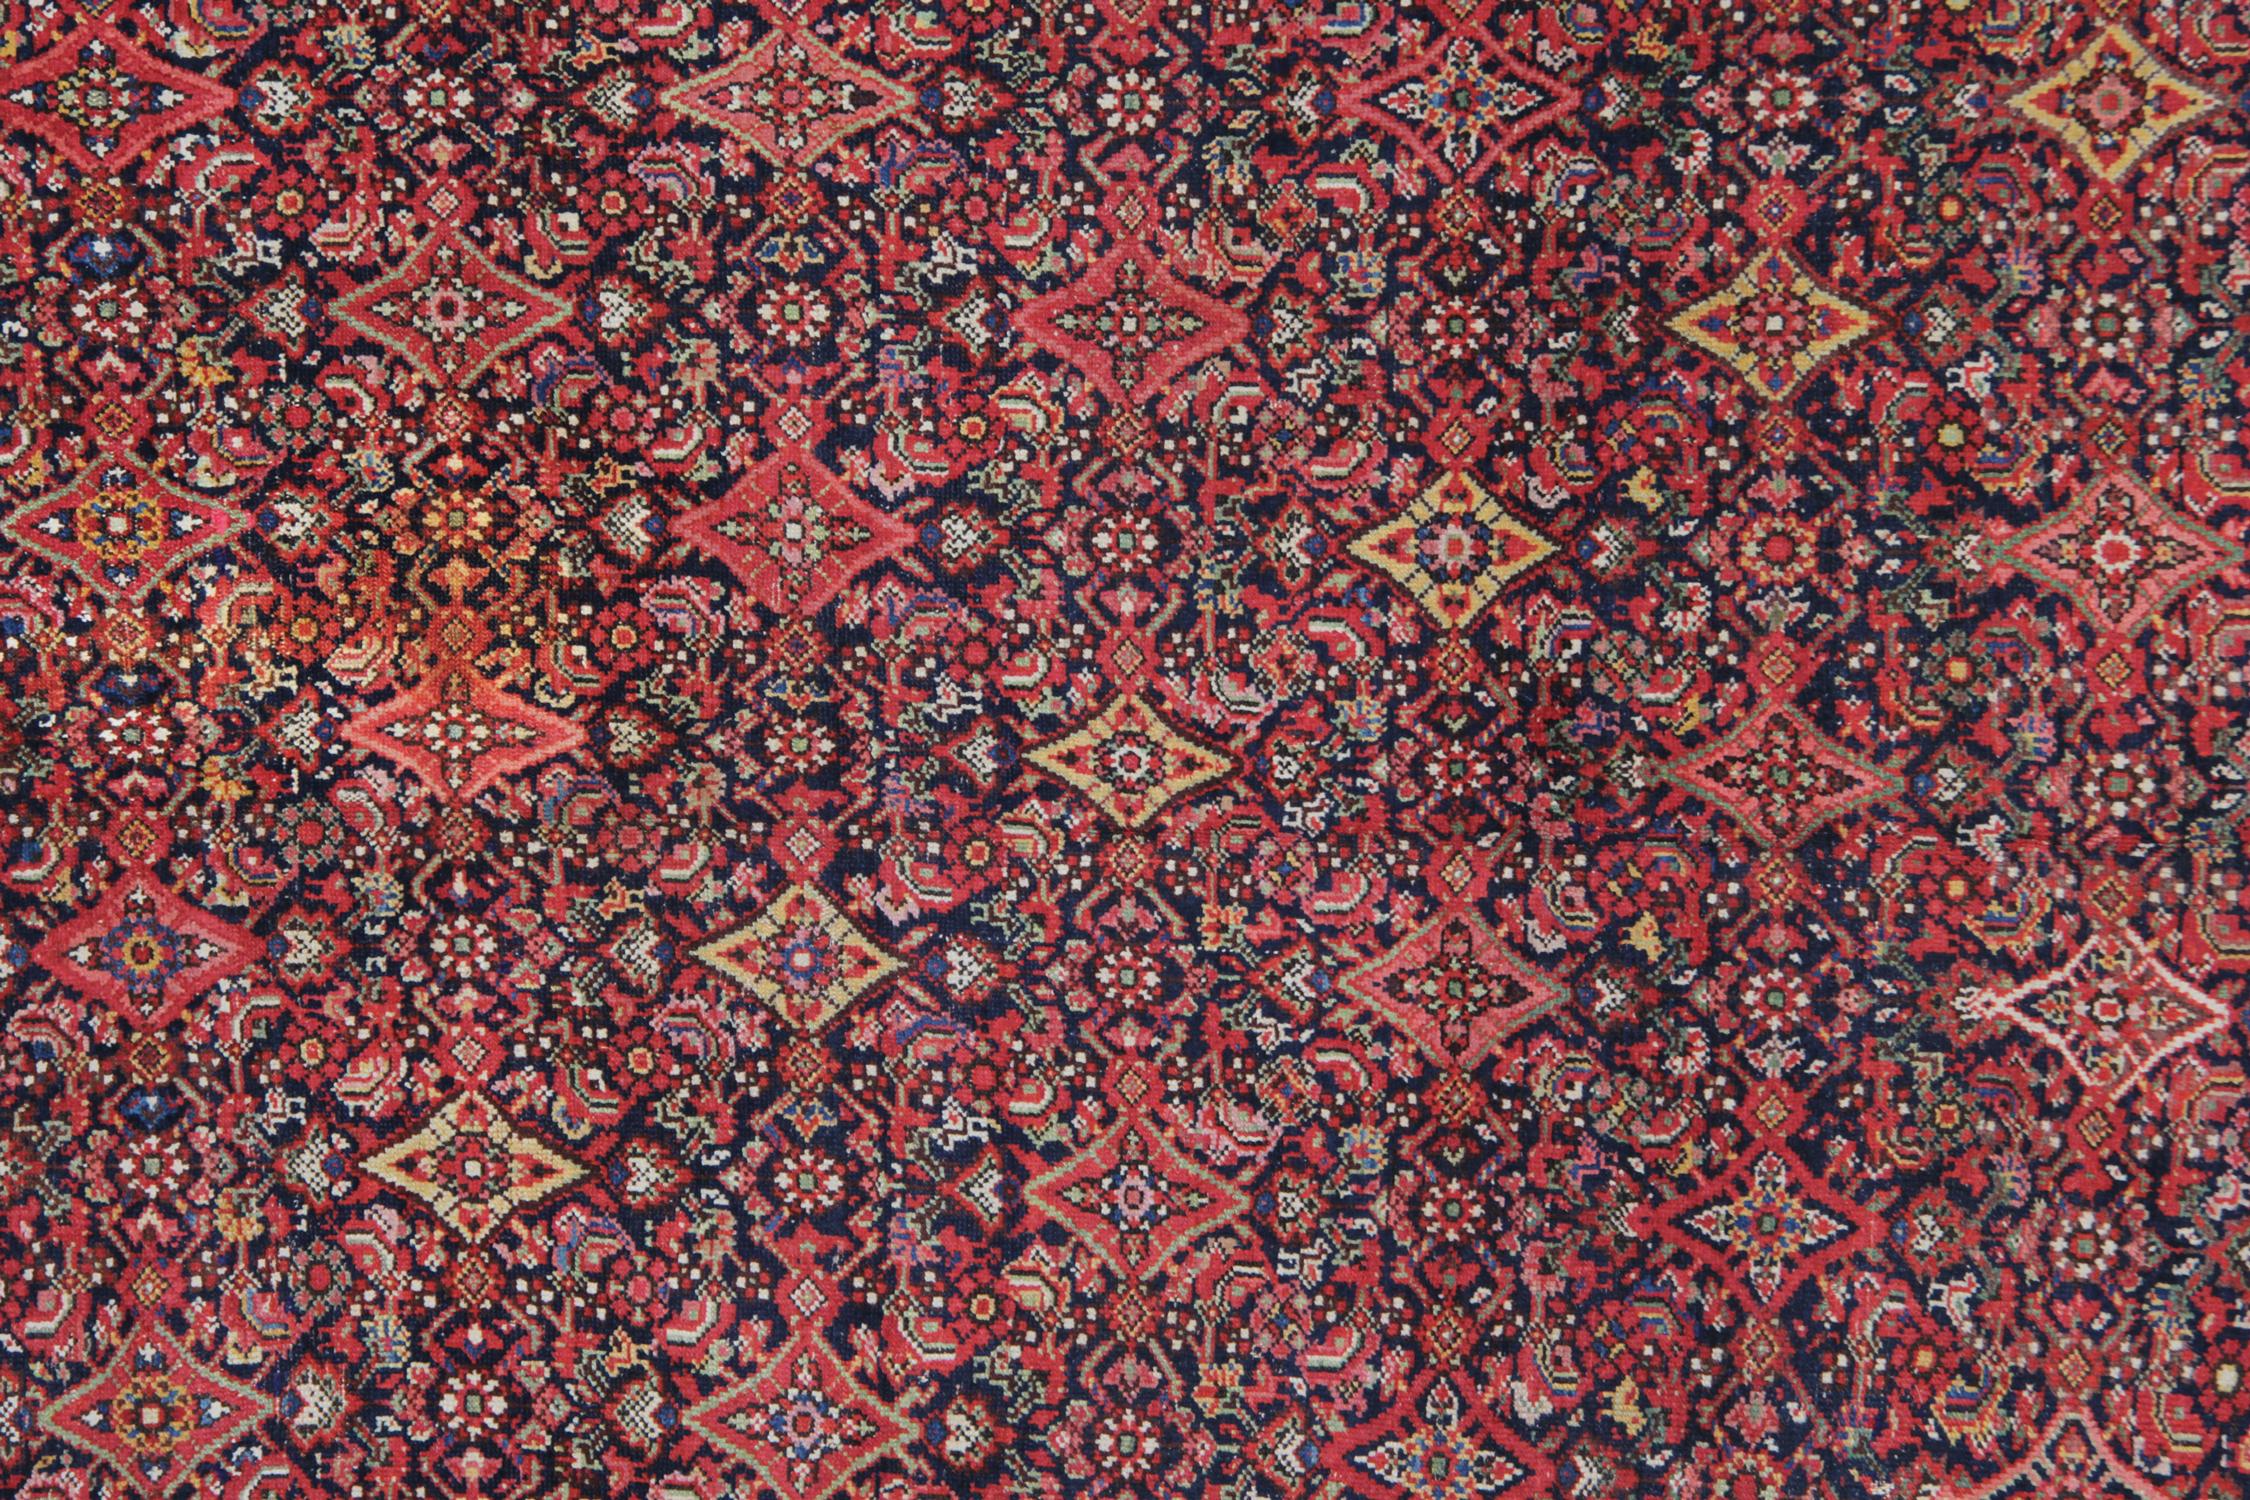 A fine antique wool rug was woven by hand in the late 19th century, circa 1880. It features an intricate all-over design through the centre, with beautiful colours of orange, brown and red colourways. The repeat, symmetrical pattern with eyecatching